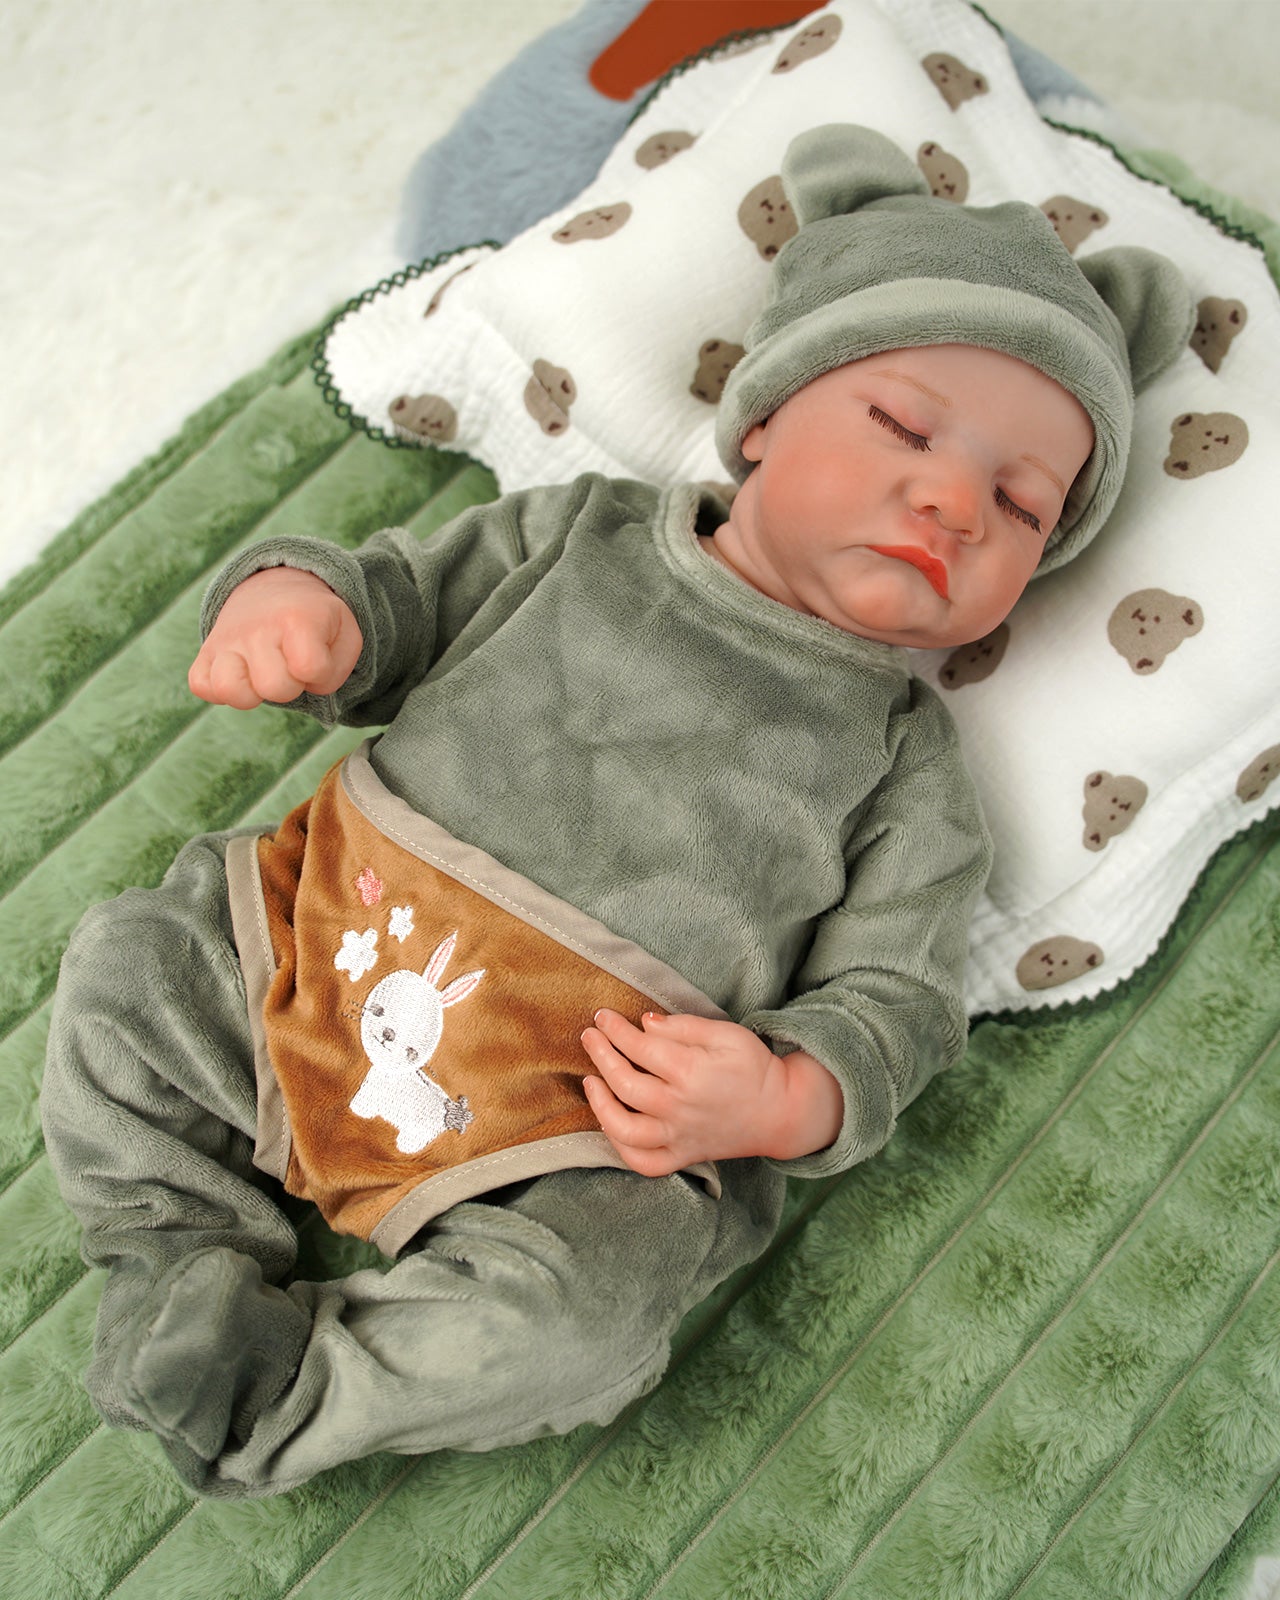 Lifelike Reborn Baby Dolls - 17 inches Realistic Newborn Baby Dolls Real  Life Baby Dolls Soft Cloth Body Baby Boy with Feeding Kit Gift Box for Kids